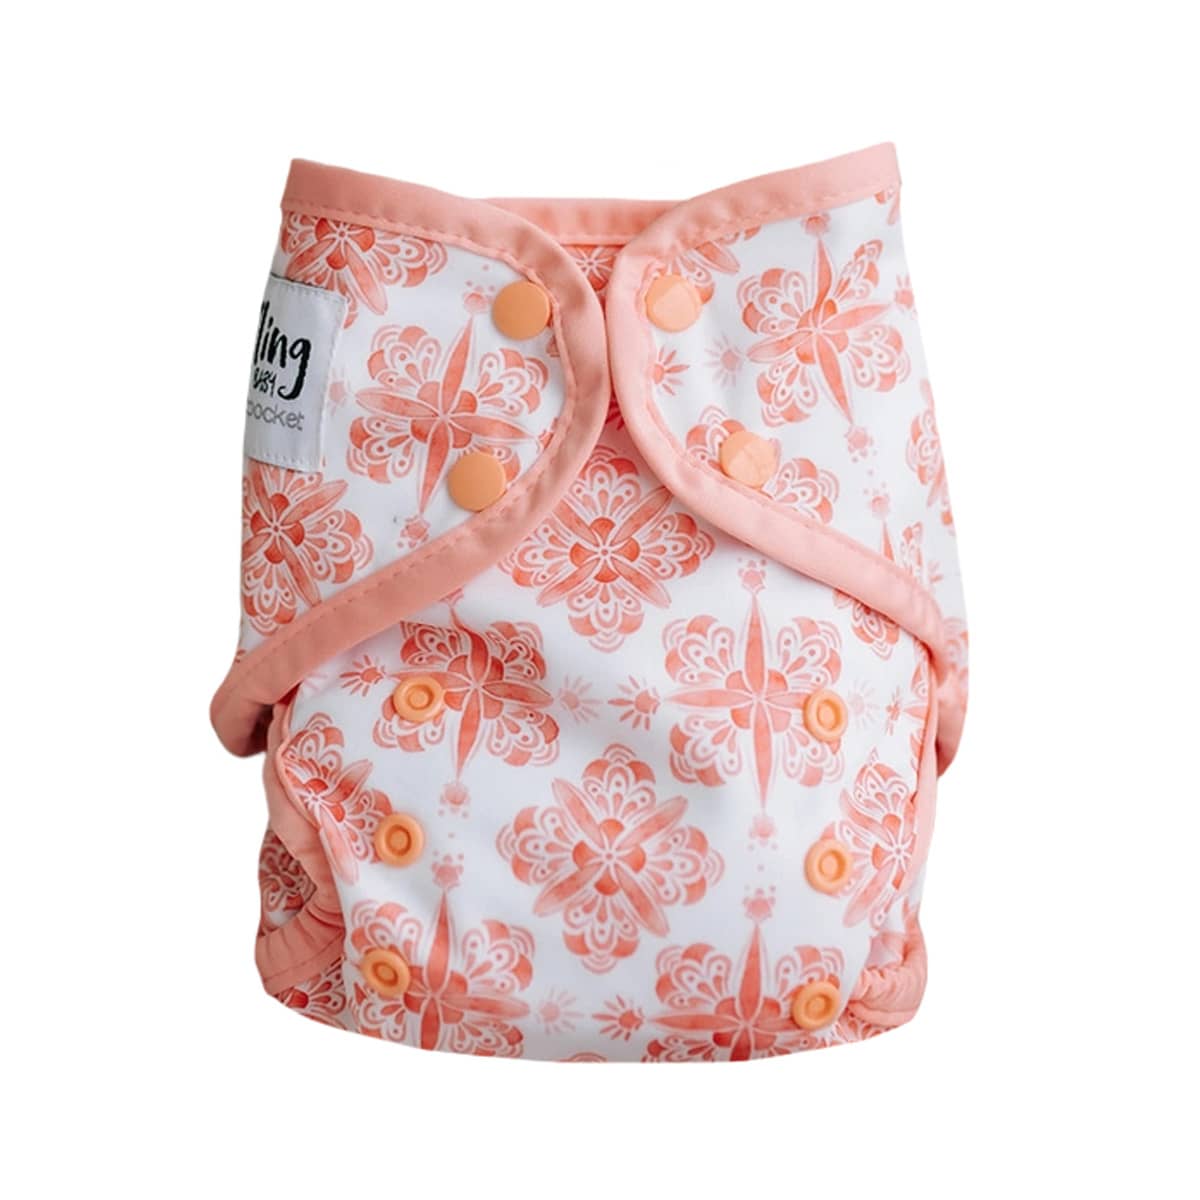 Seedling Baby Multi-Fit Print Pocket Nappy - Peaches and Cream